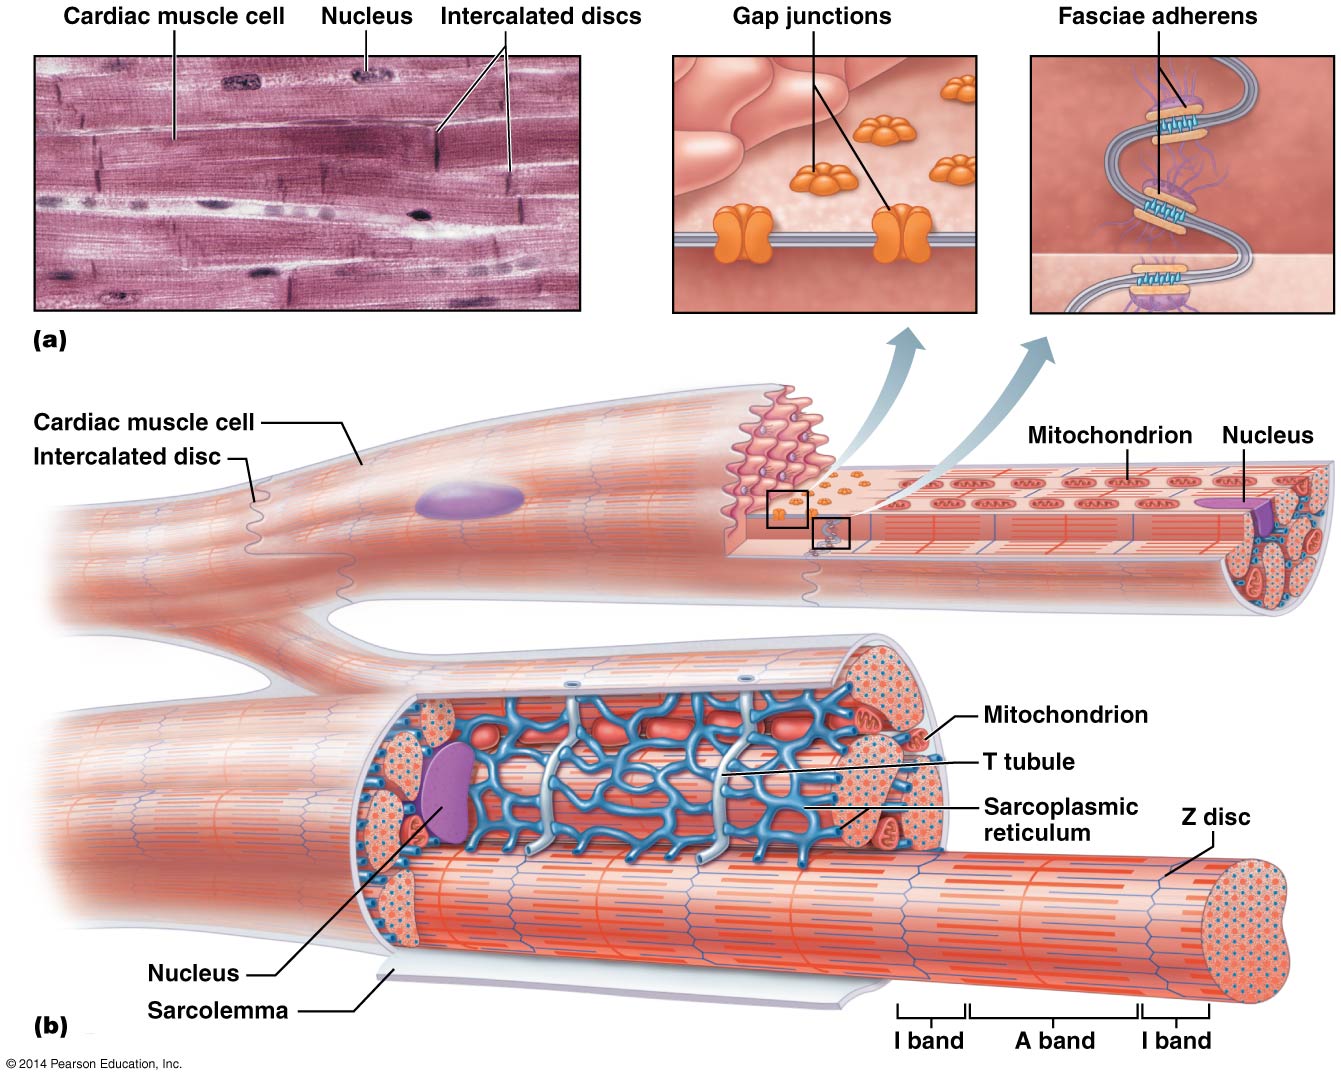 Diagram of cellular structure of cardiac muscle cells.